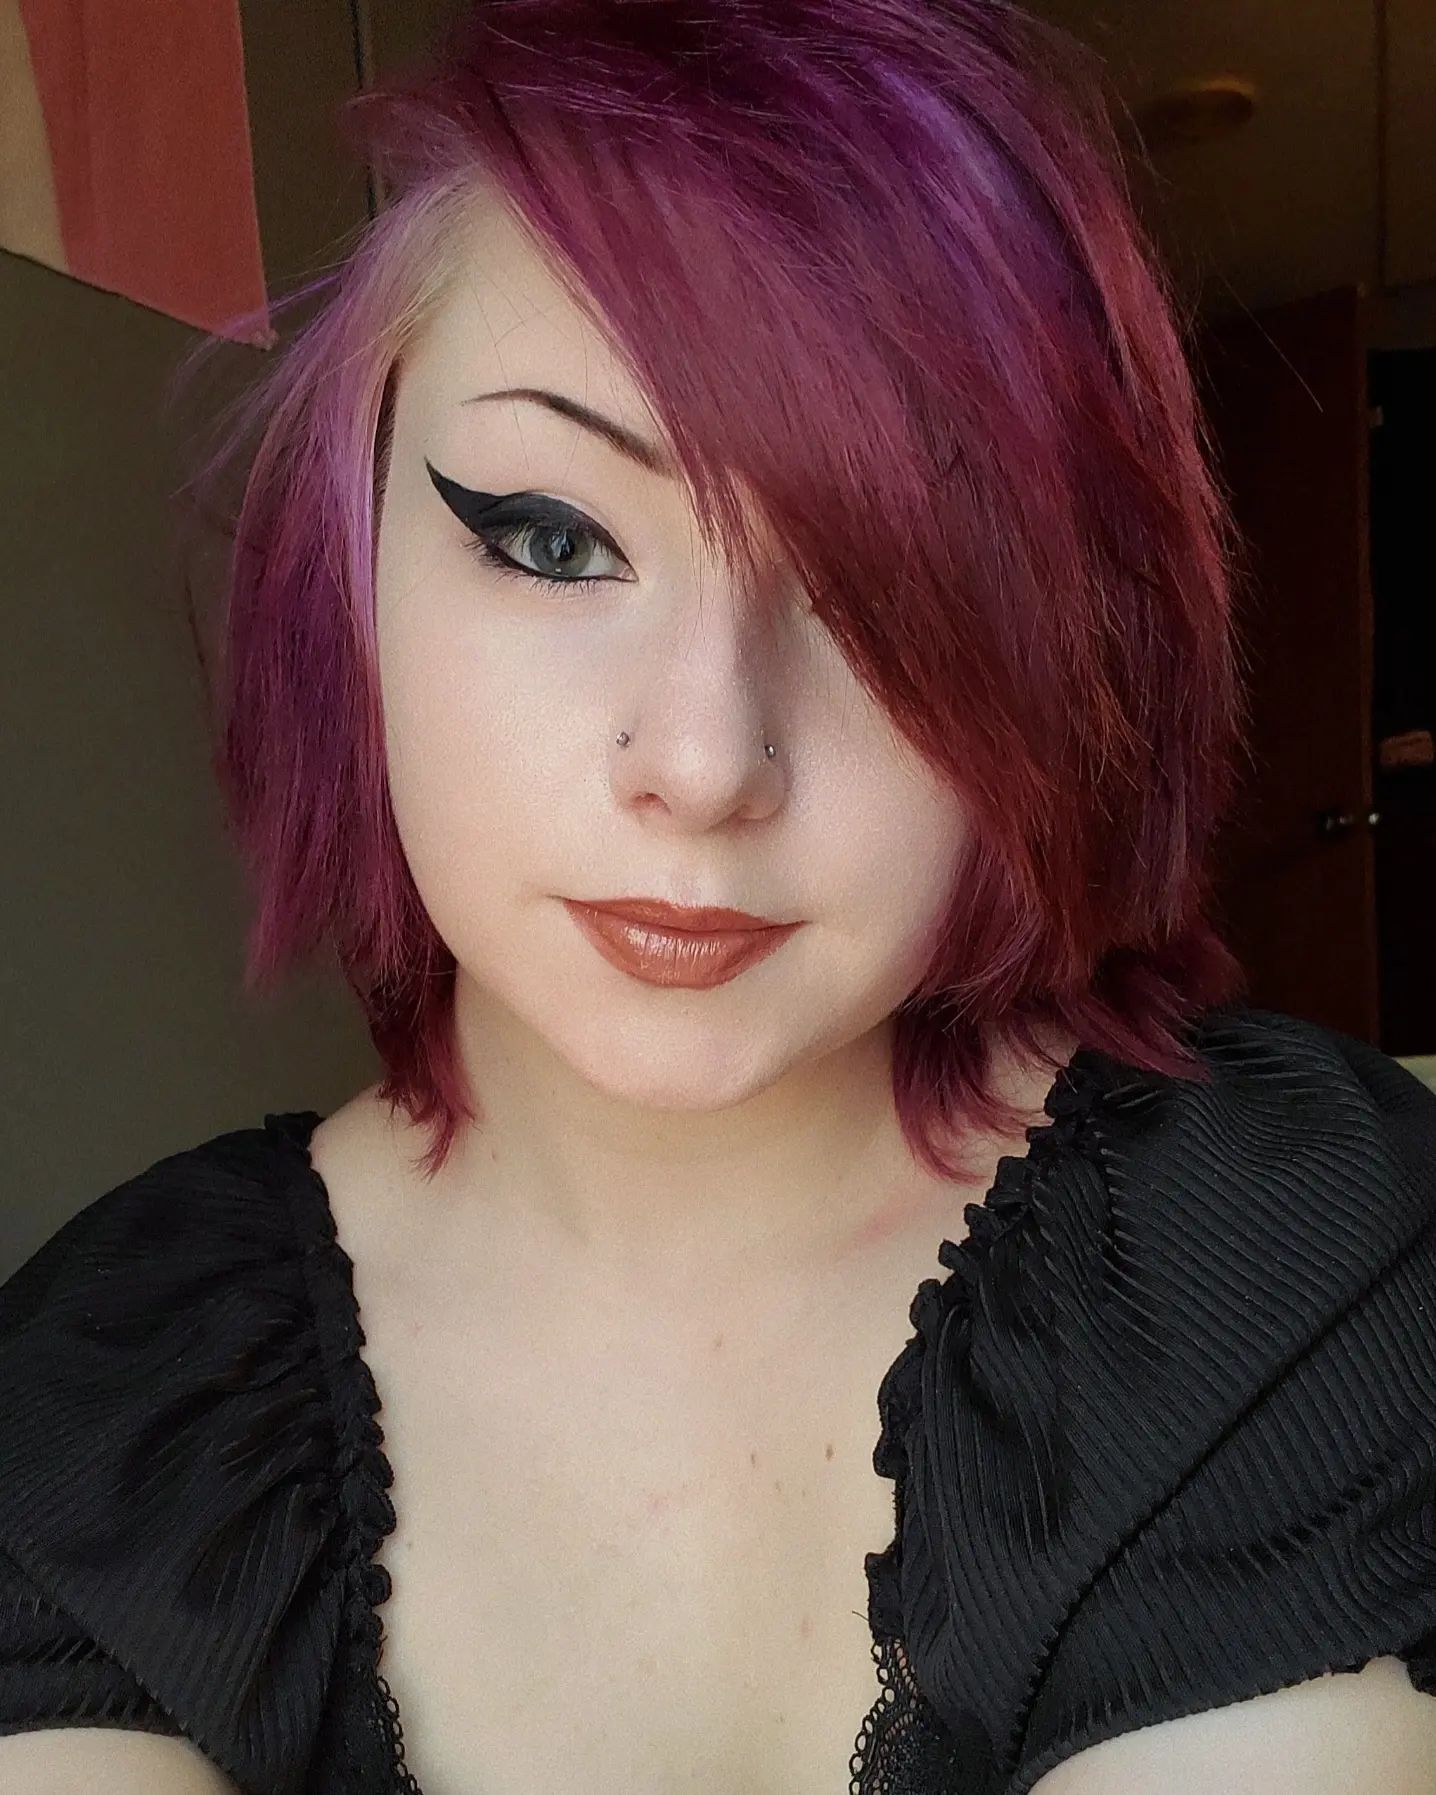 the dark purple faded so quickly but I kinda prefer this shade more ngl <3

#coloredhair #pinkhair #hairdye #pink